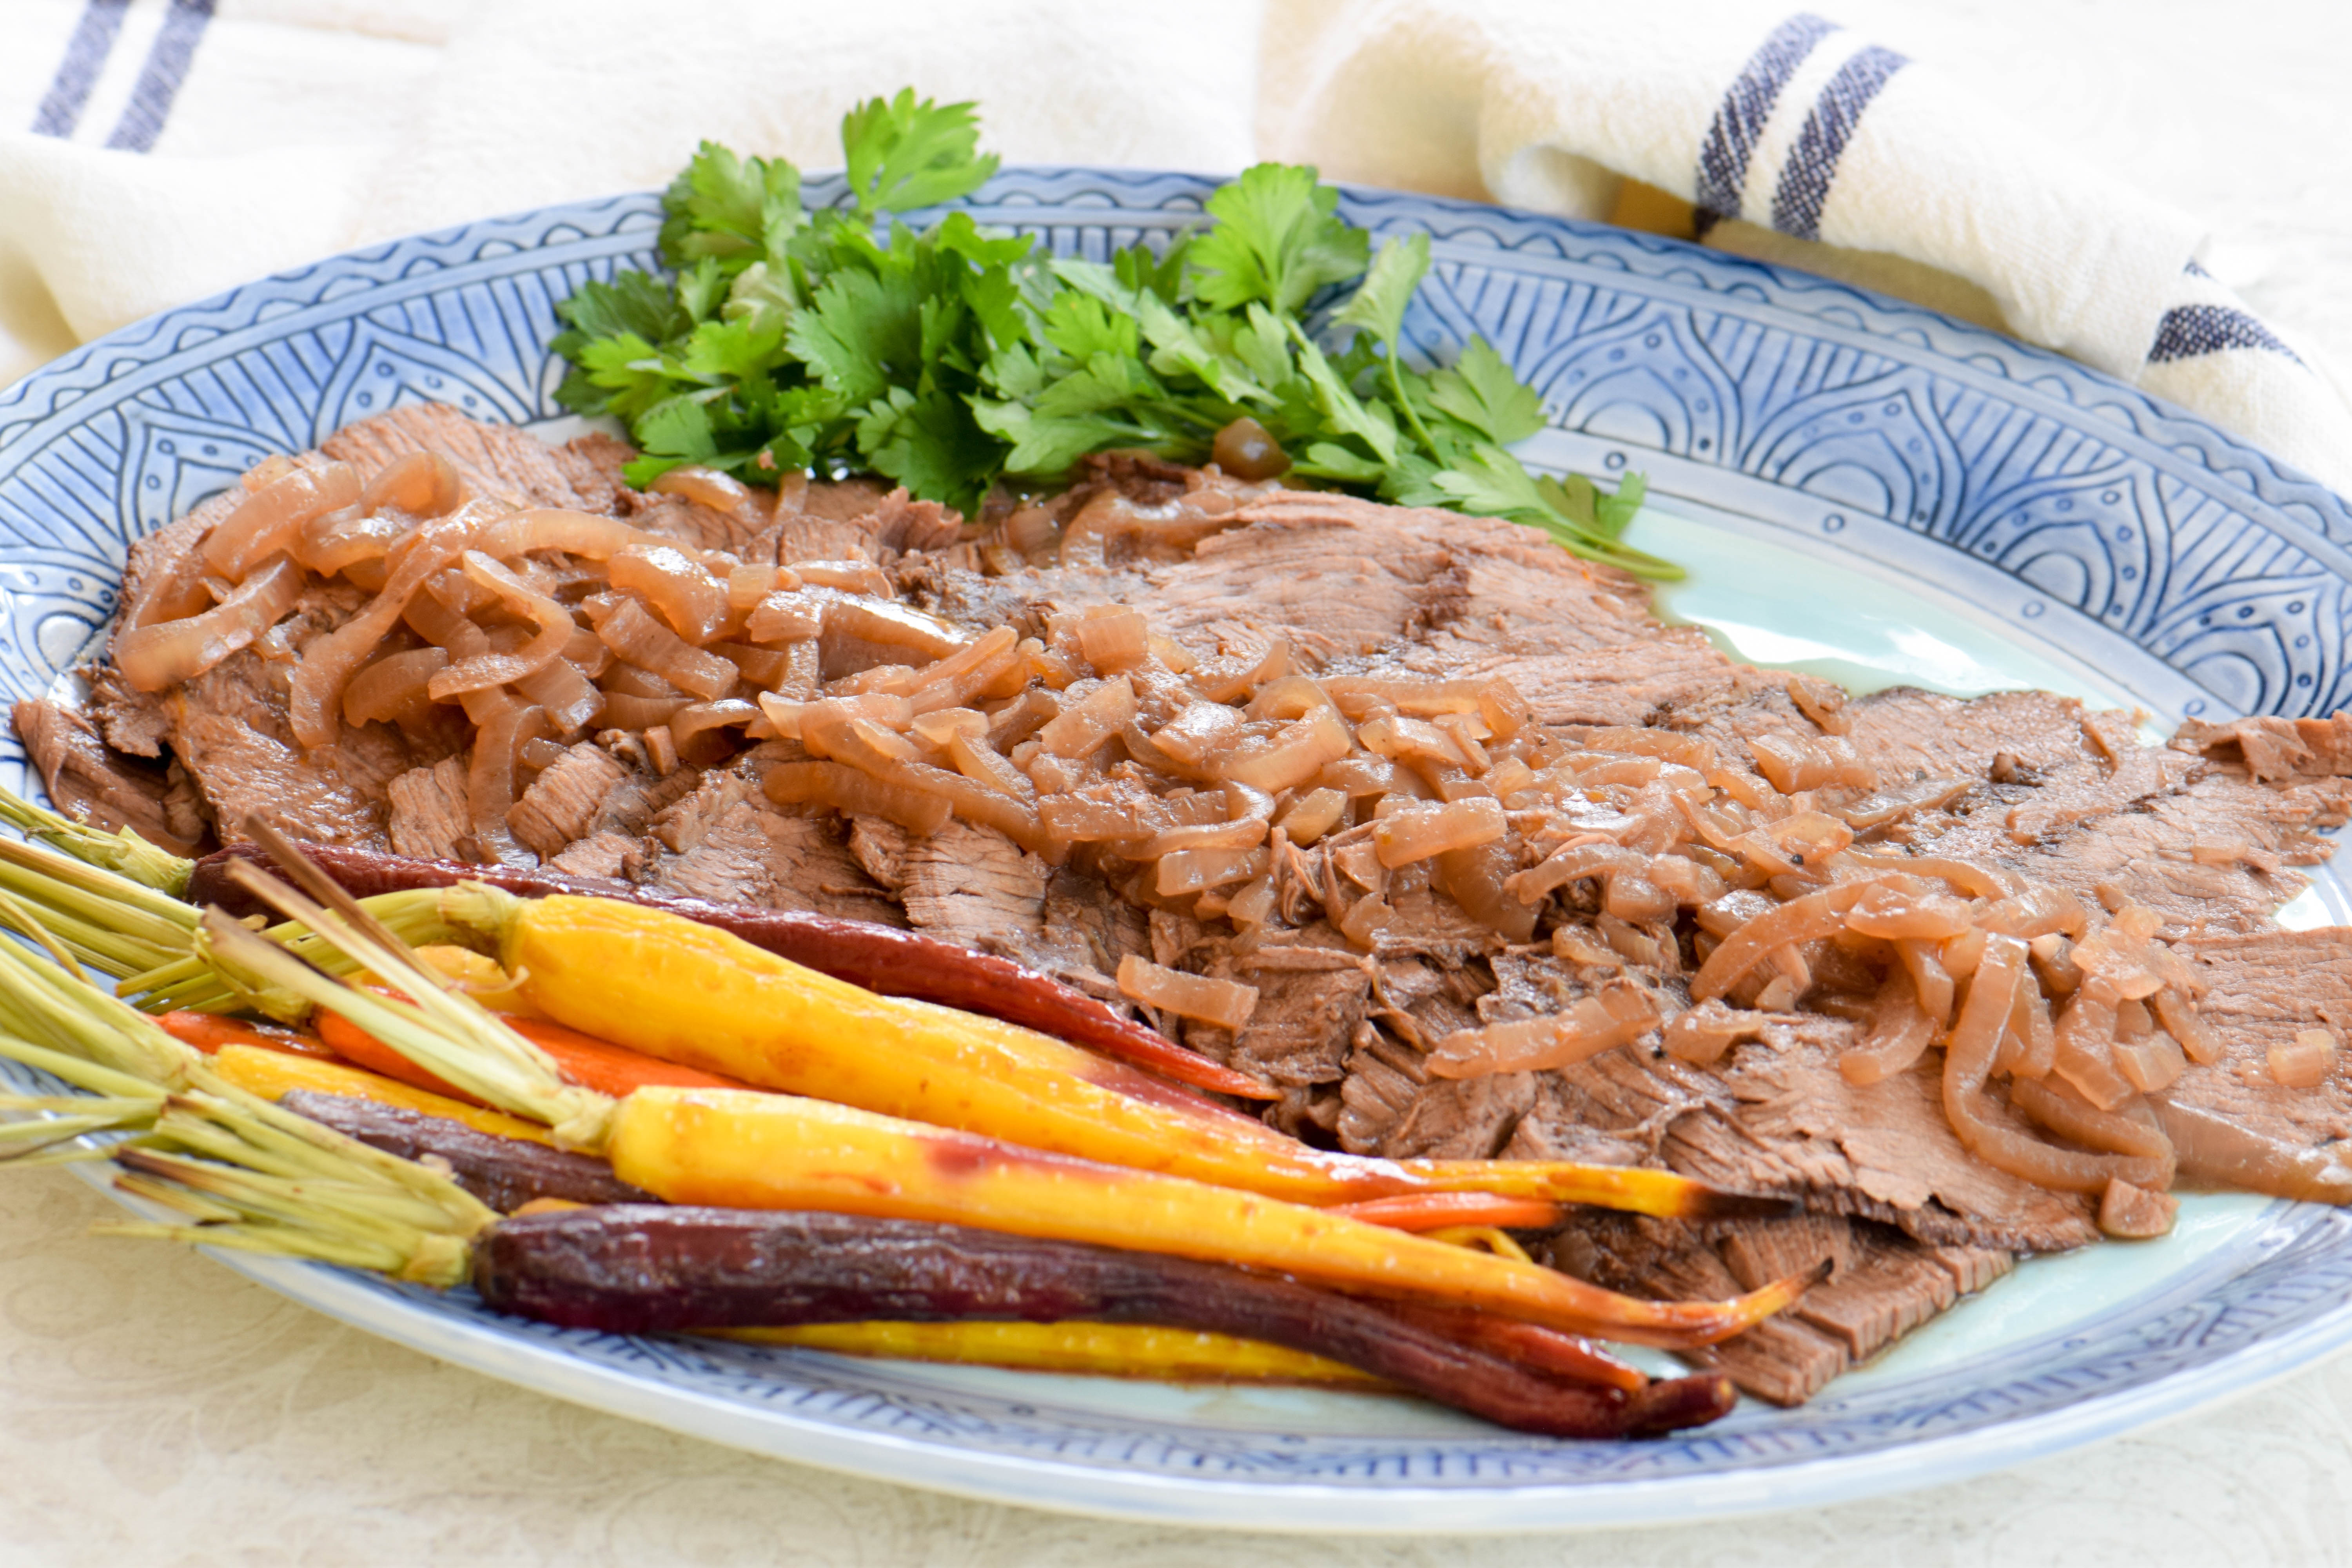 Braised Beef Brisket & Roasted Carrots with a Pomegranate-Honey Glaze for Rosh Hashanah